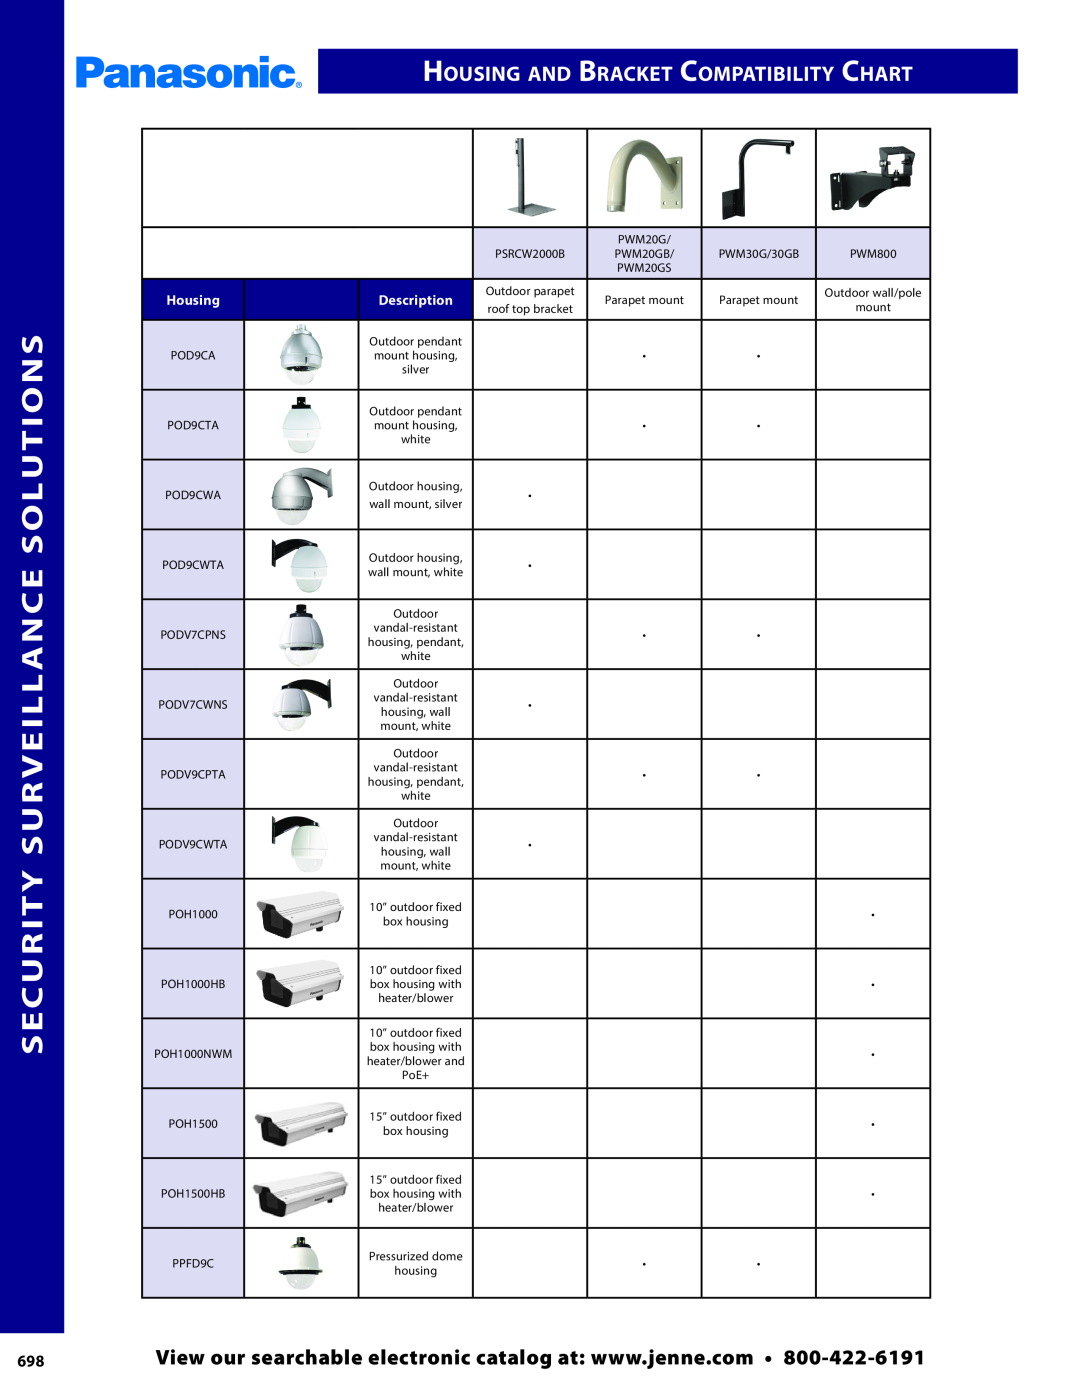 Panasonic PMPU2000 manual Security Surveillance Solutions, Housing and Bracket Compatibility Chart, PWM20G 